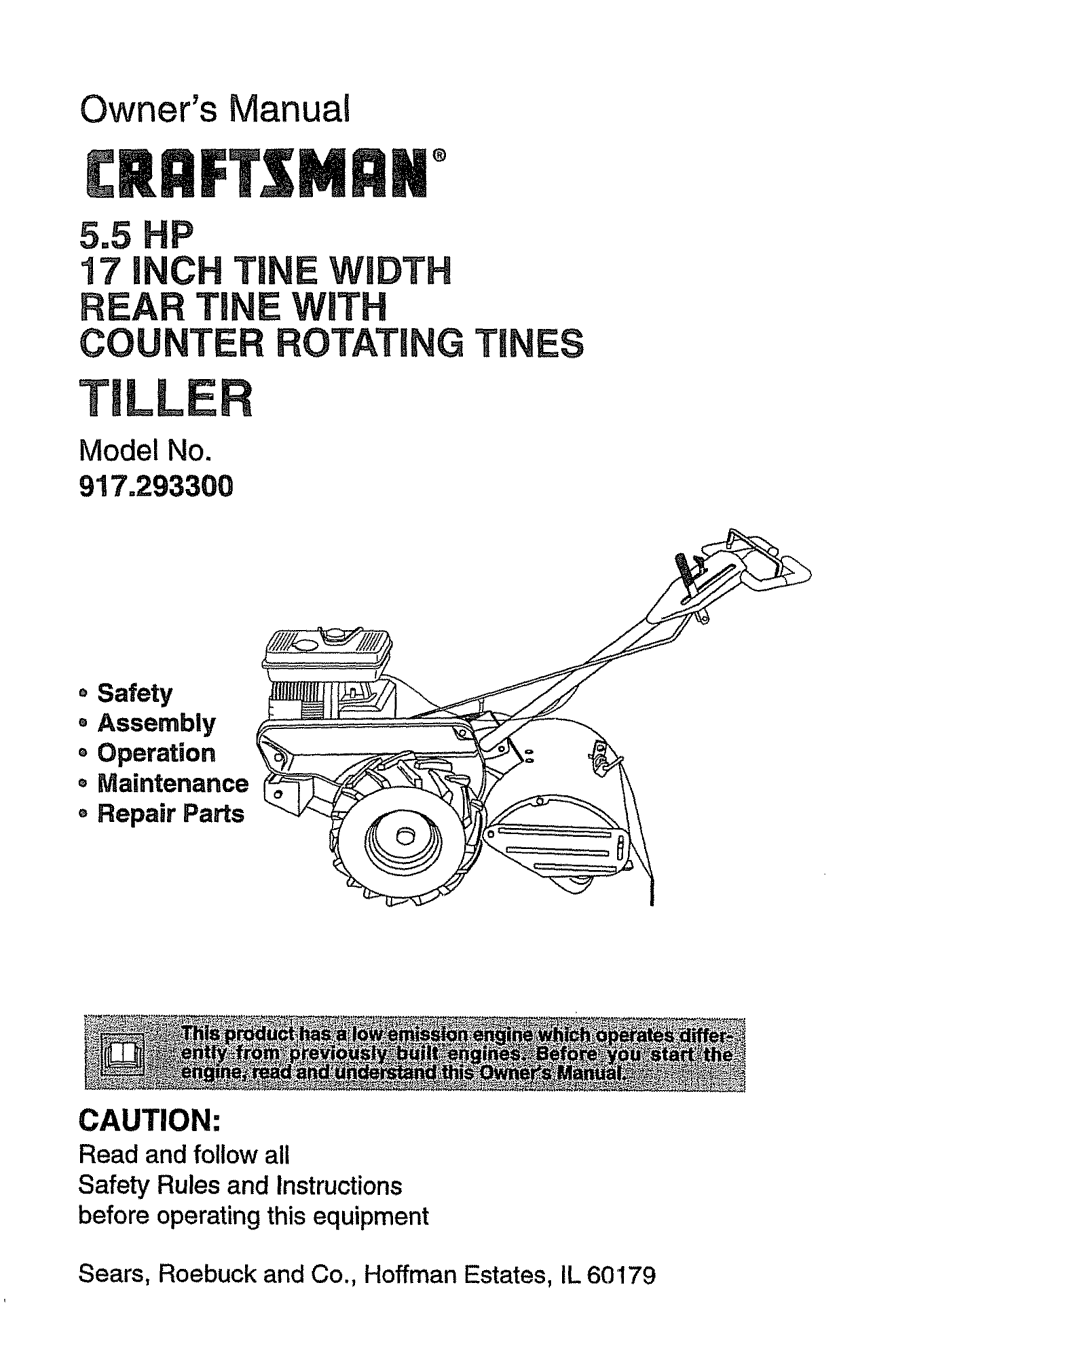 Craftsman owner manual Model No, 917.293300, oSafety Assembly Operation, oMaintenance, Repair Parts, TmLLE, 5.5 P 